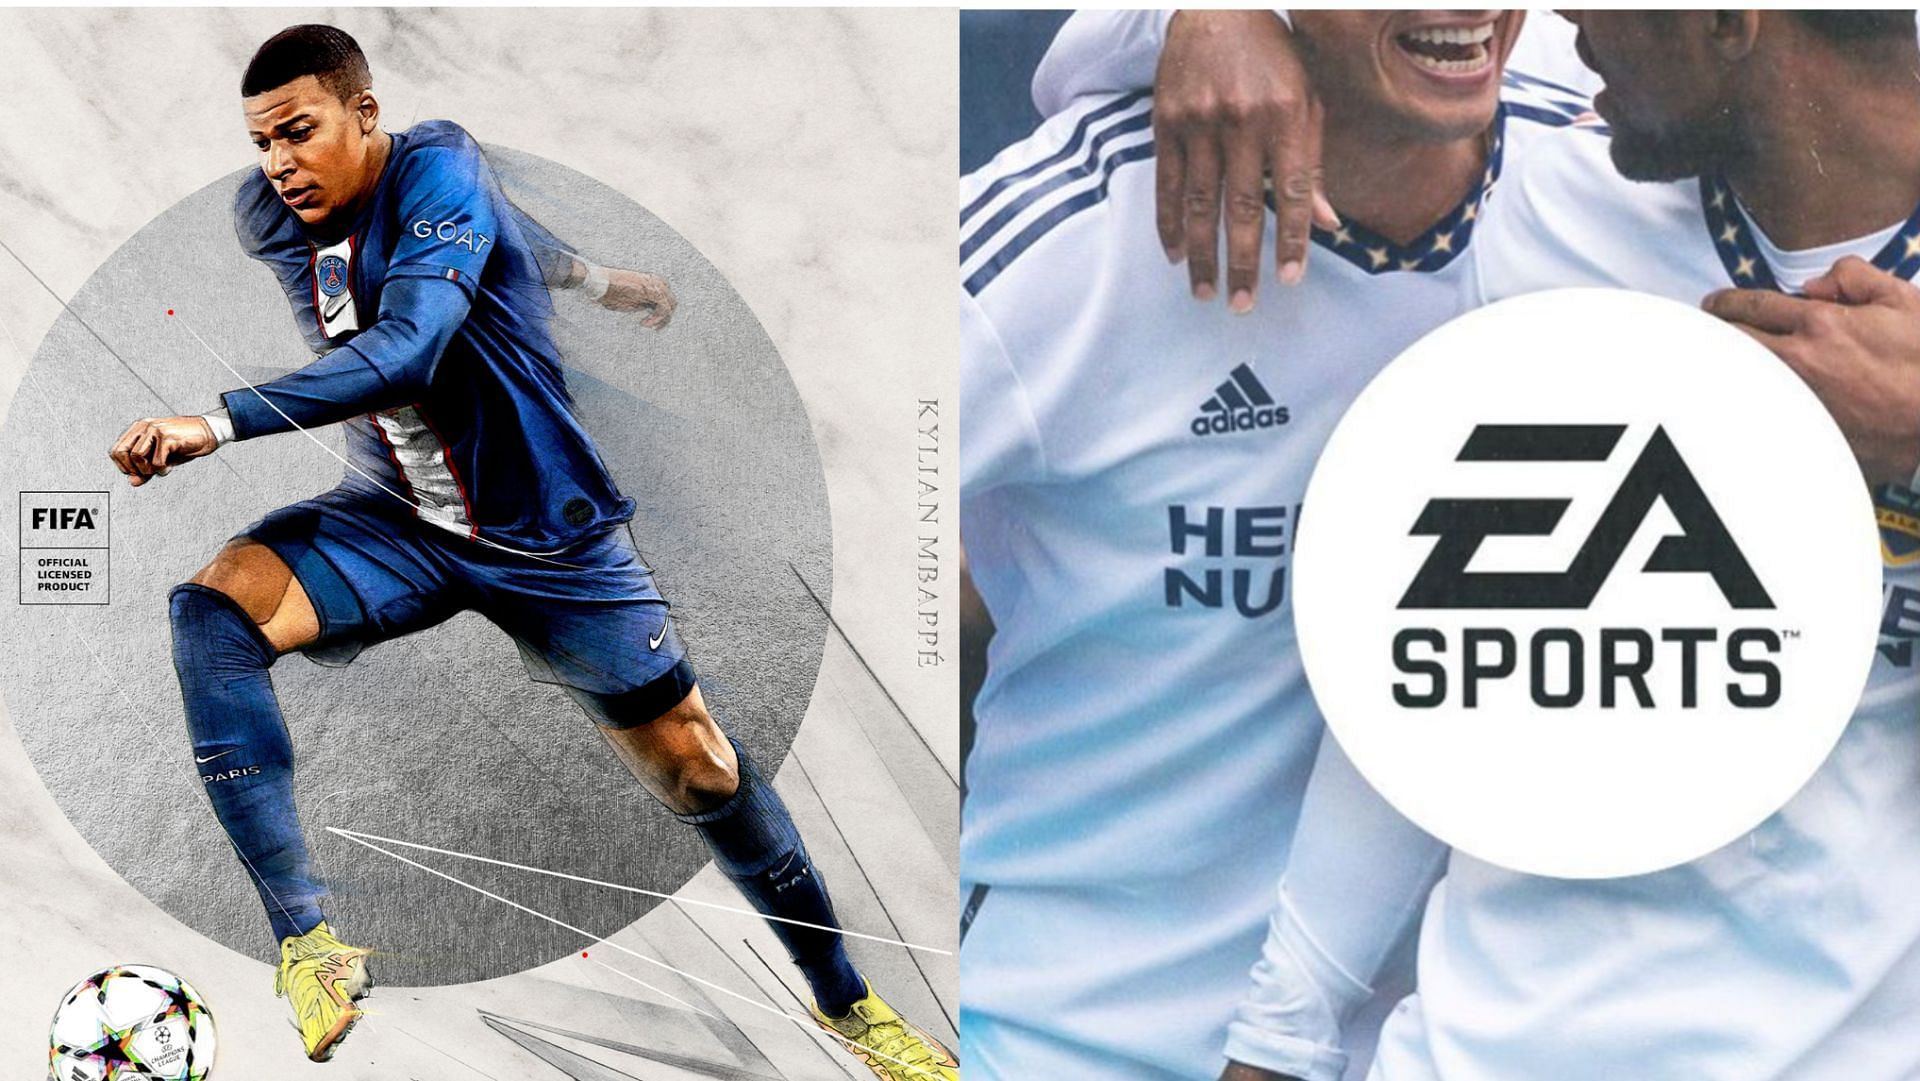 The series will undergo a name change following FIFA 23 (Images via EA Sports, AS)